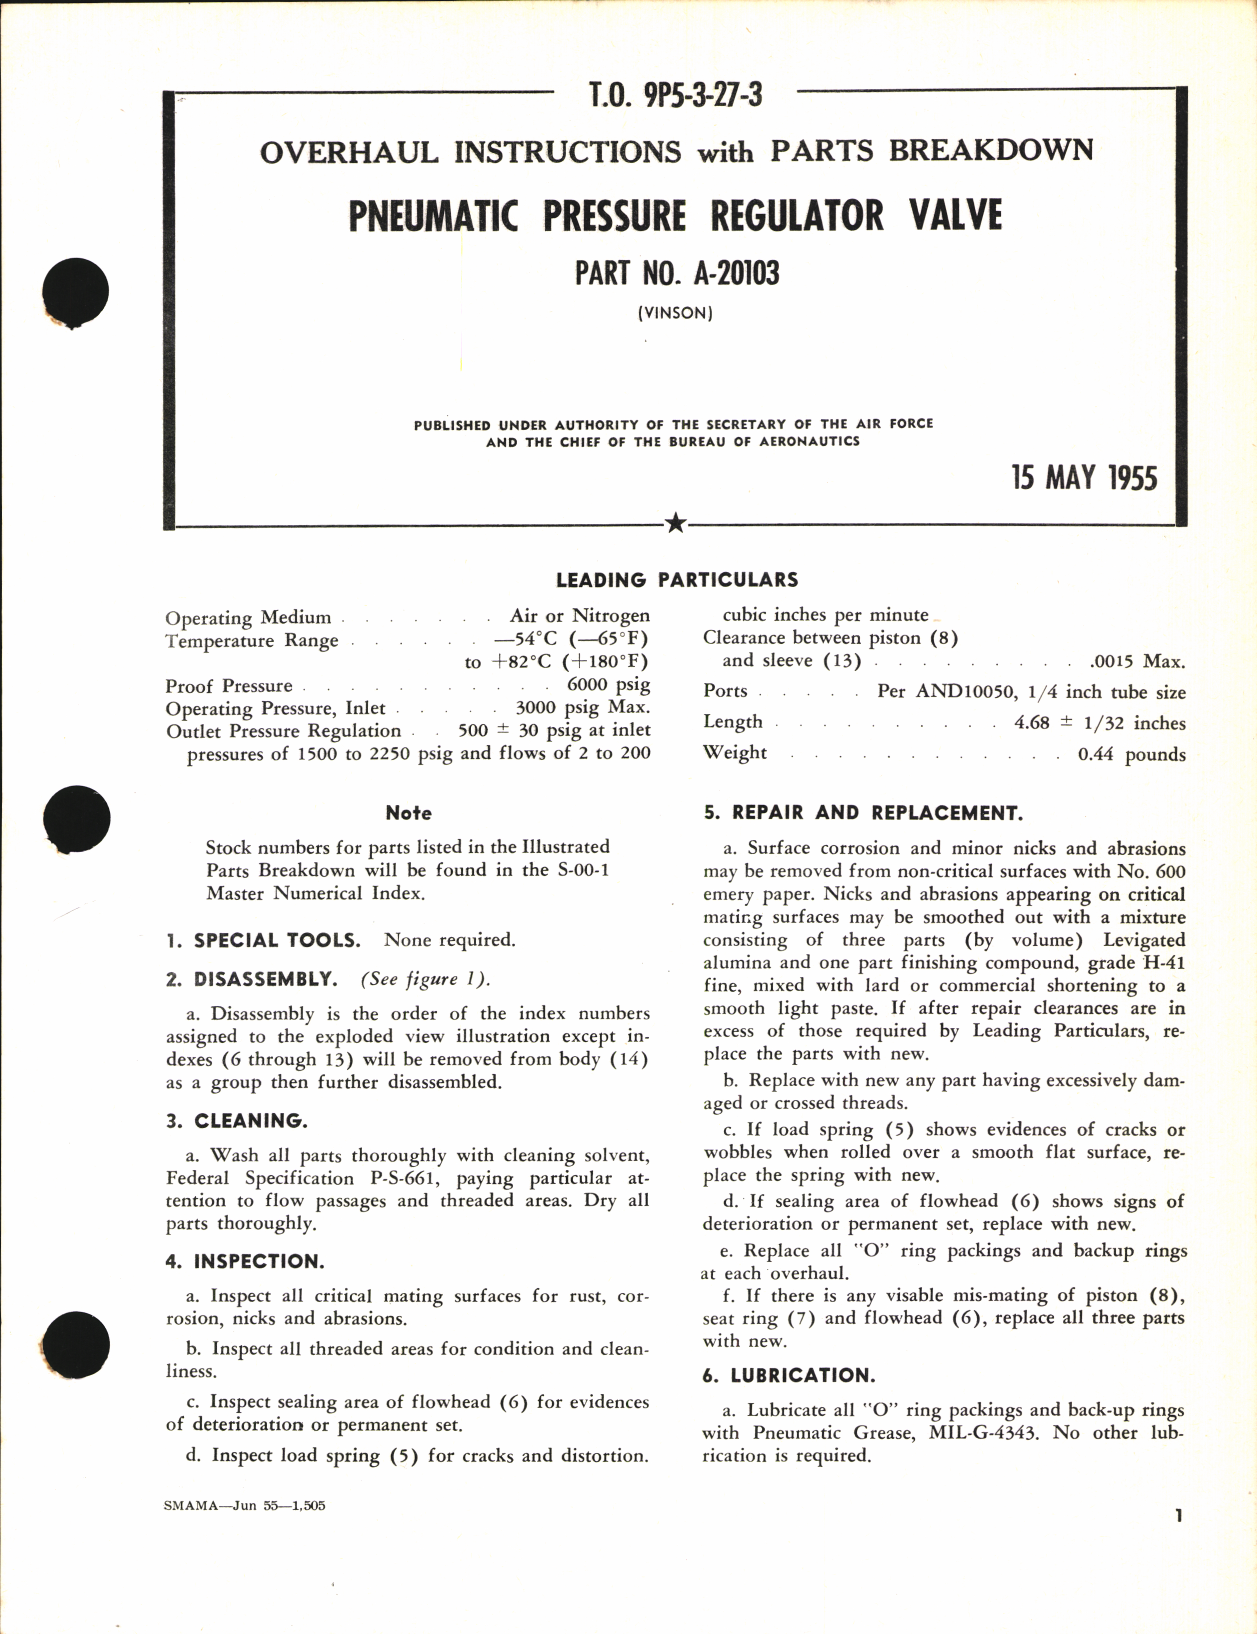 Sample page 1 from AirCorps Library document: Overhaul Instructions with Parts Breakdown for Pneumatic Pressure Regulator Valve Part No. A-20103 